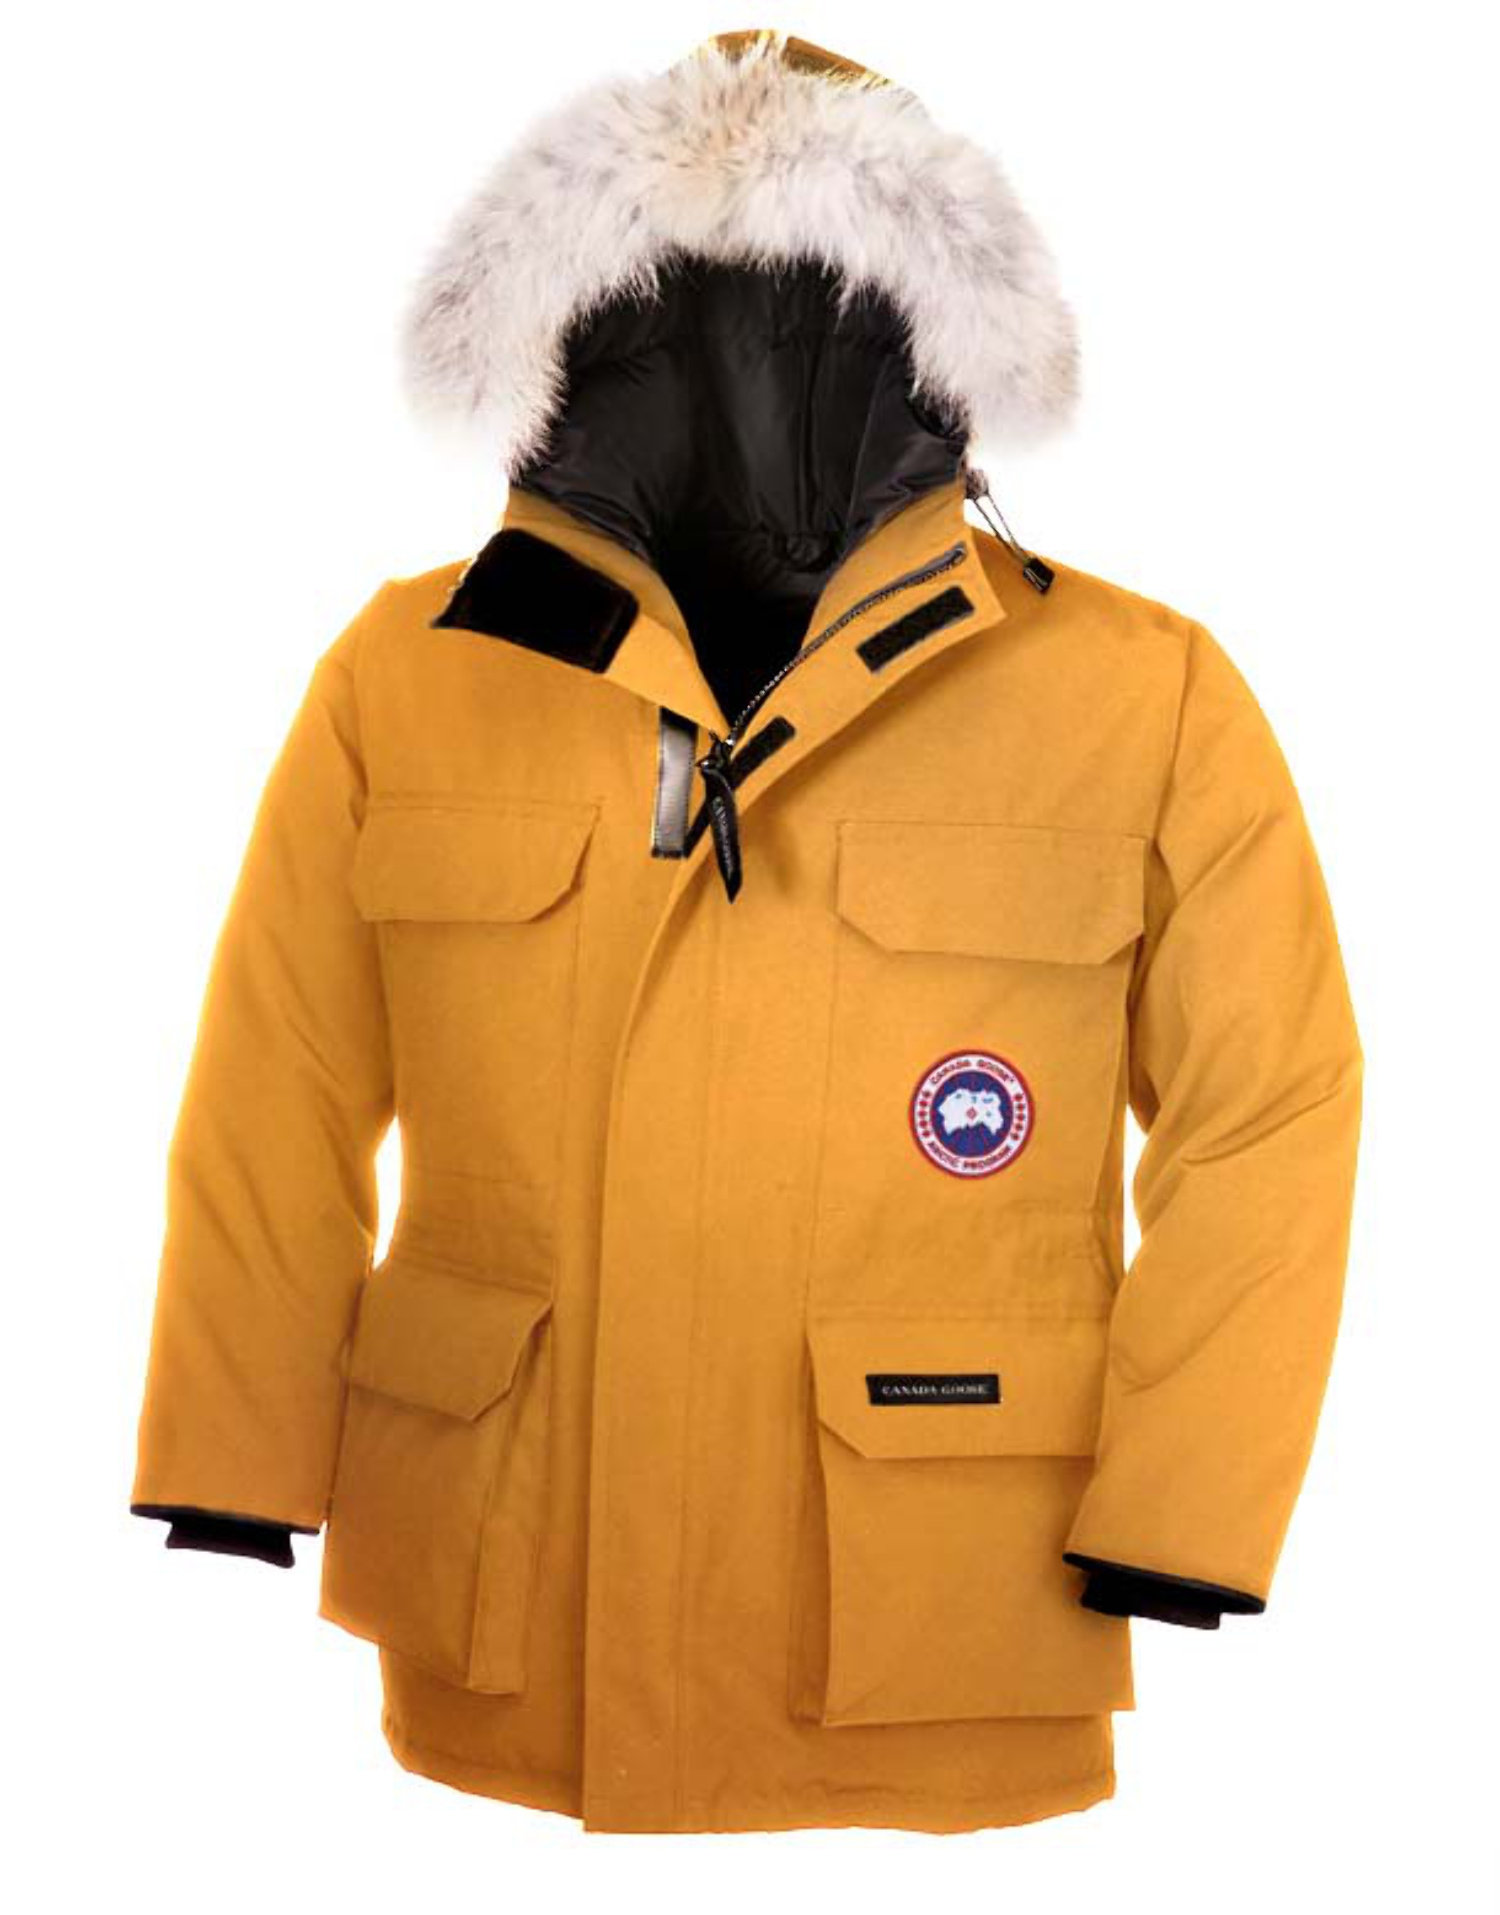 Canada Goose store - Canada Goose Expedition Parka Jackets Kids Yellow www ...